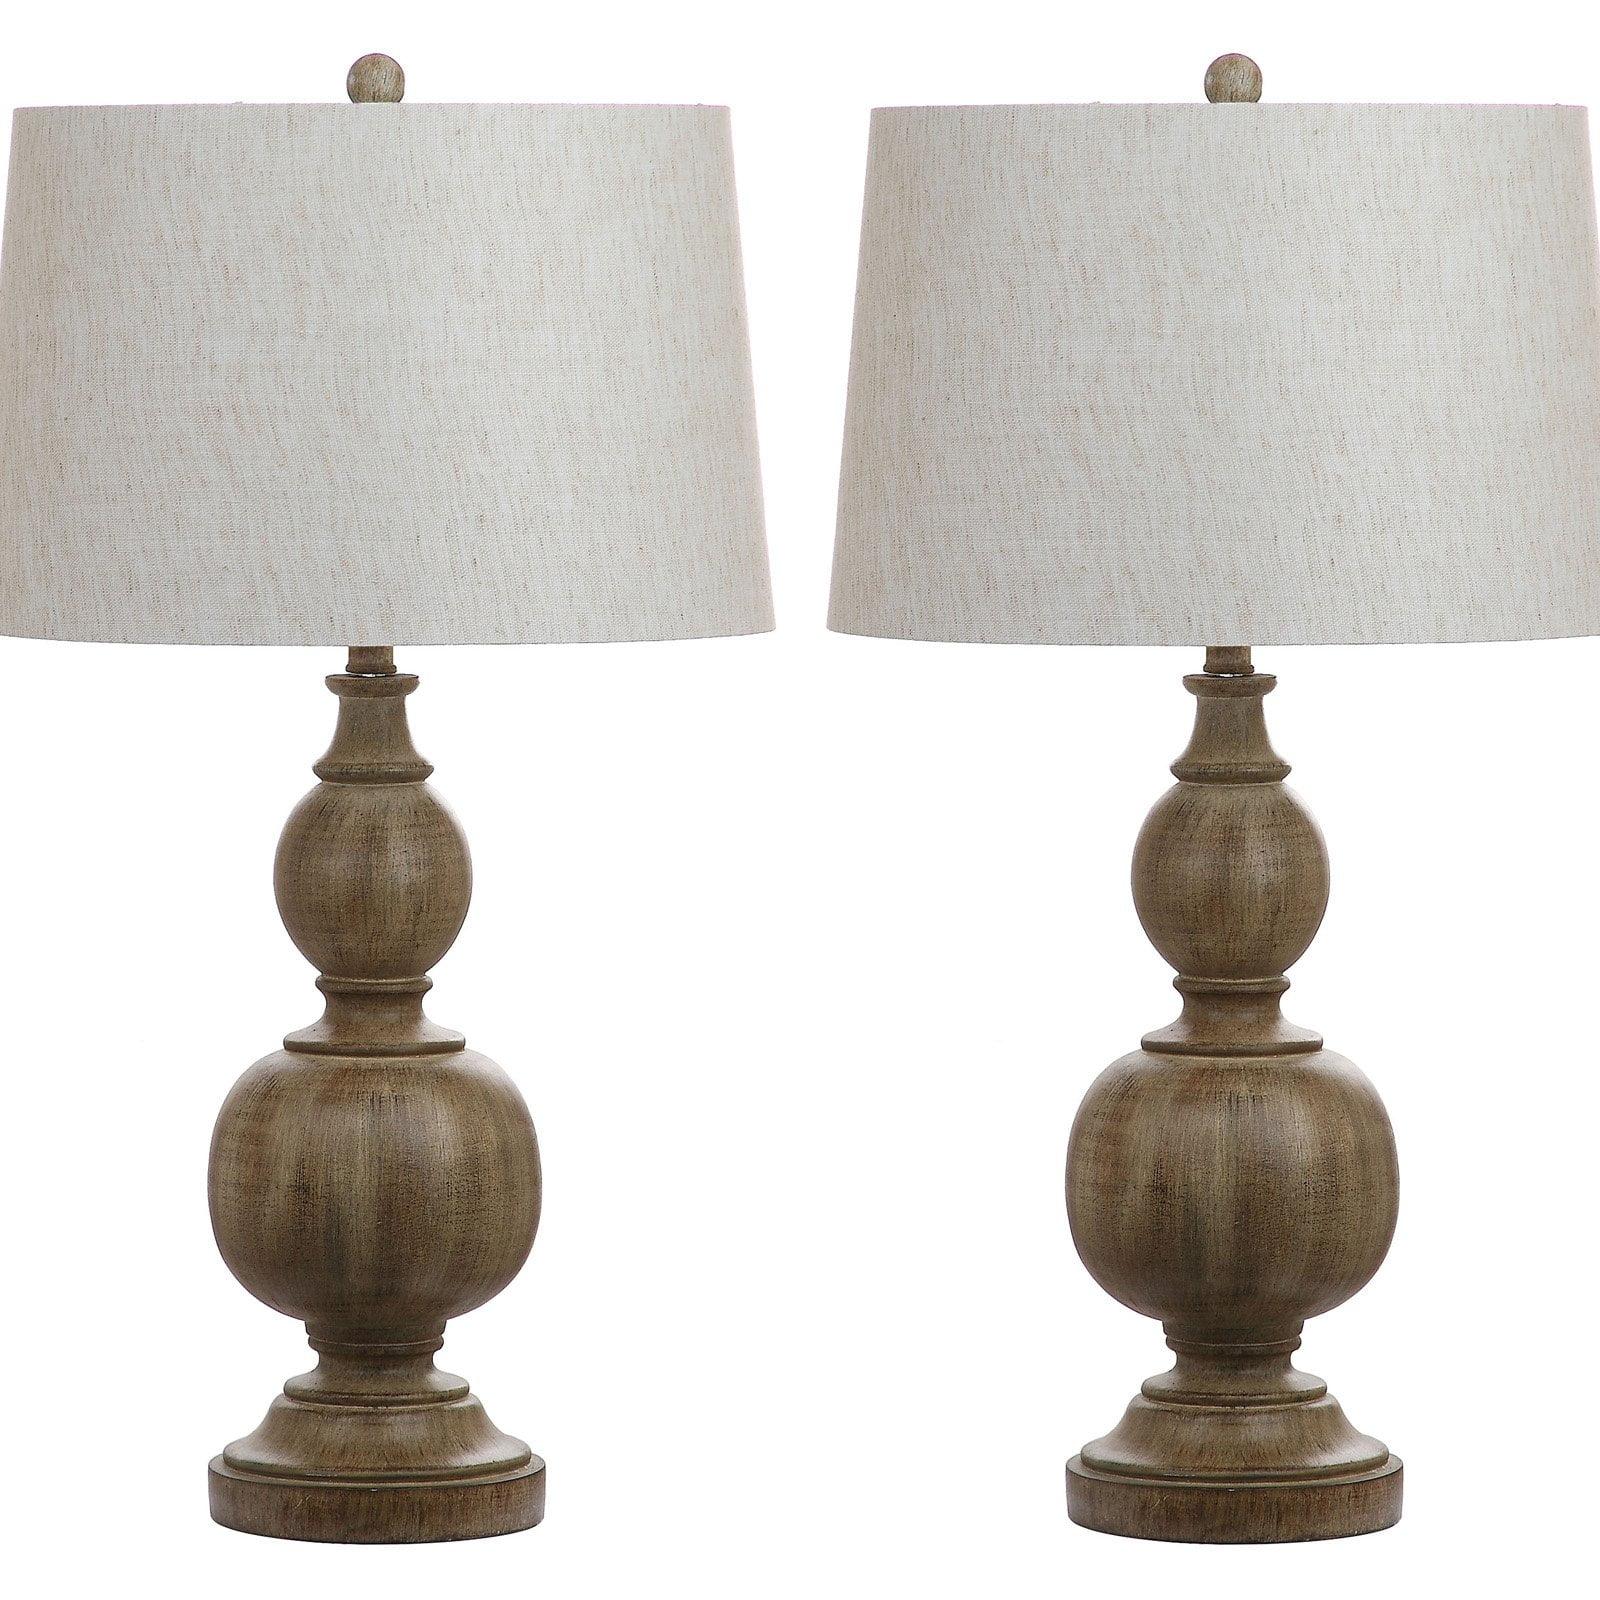 Araceli Traditional Carved Wood-Inspired Table Lamp Set, Brown and White